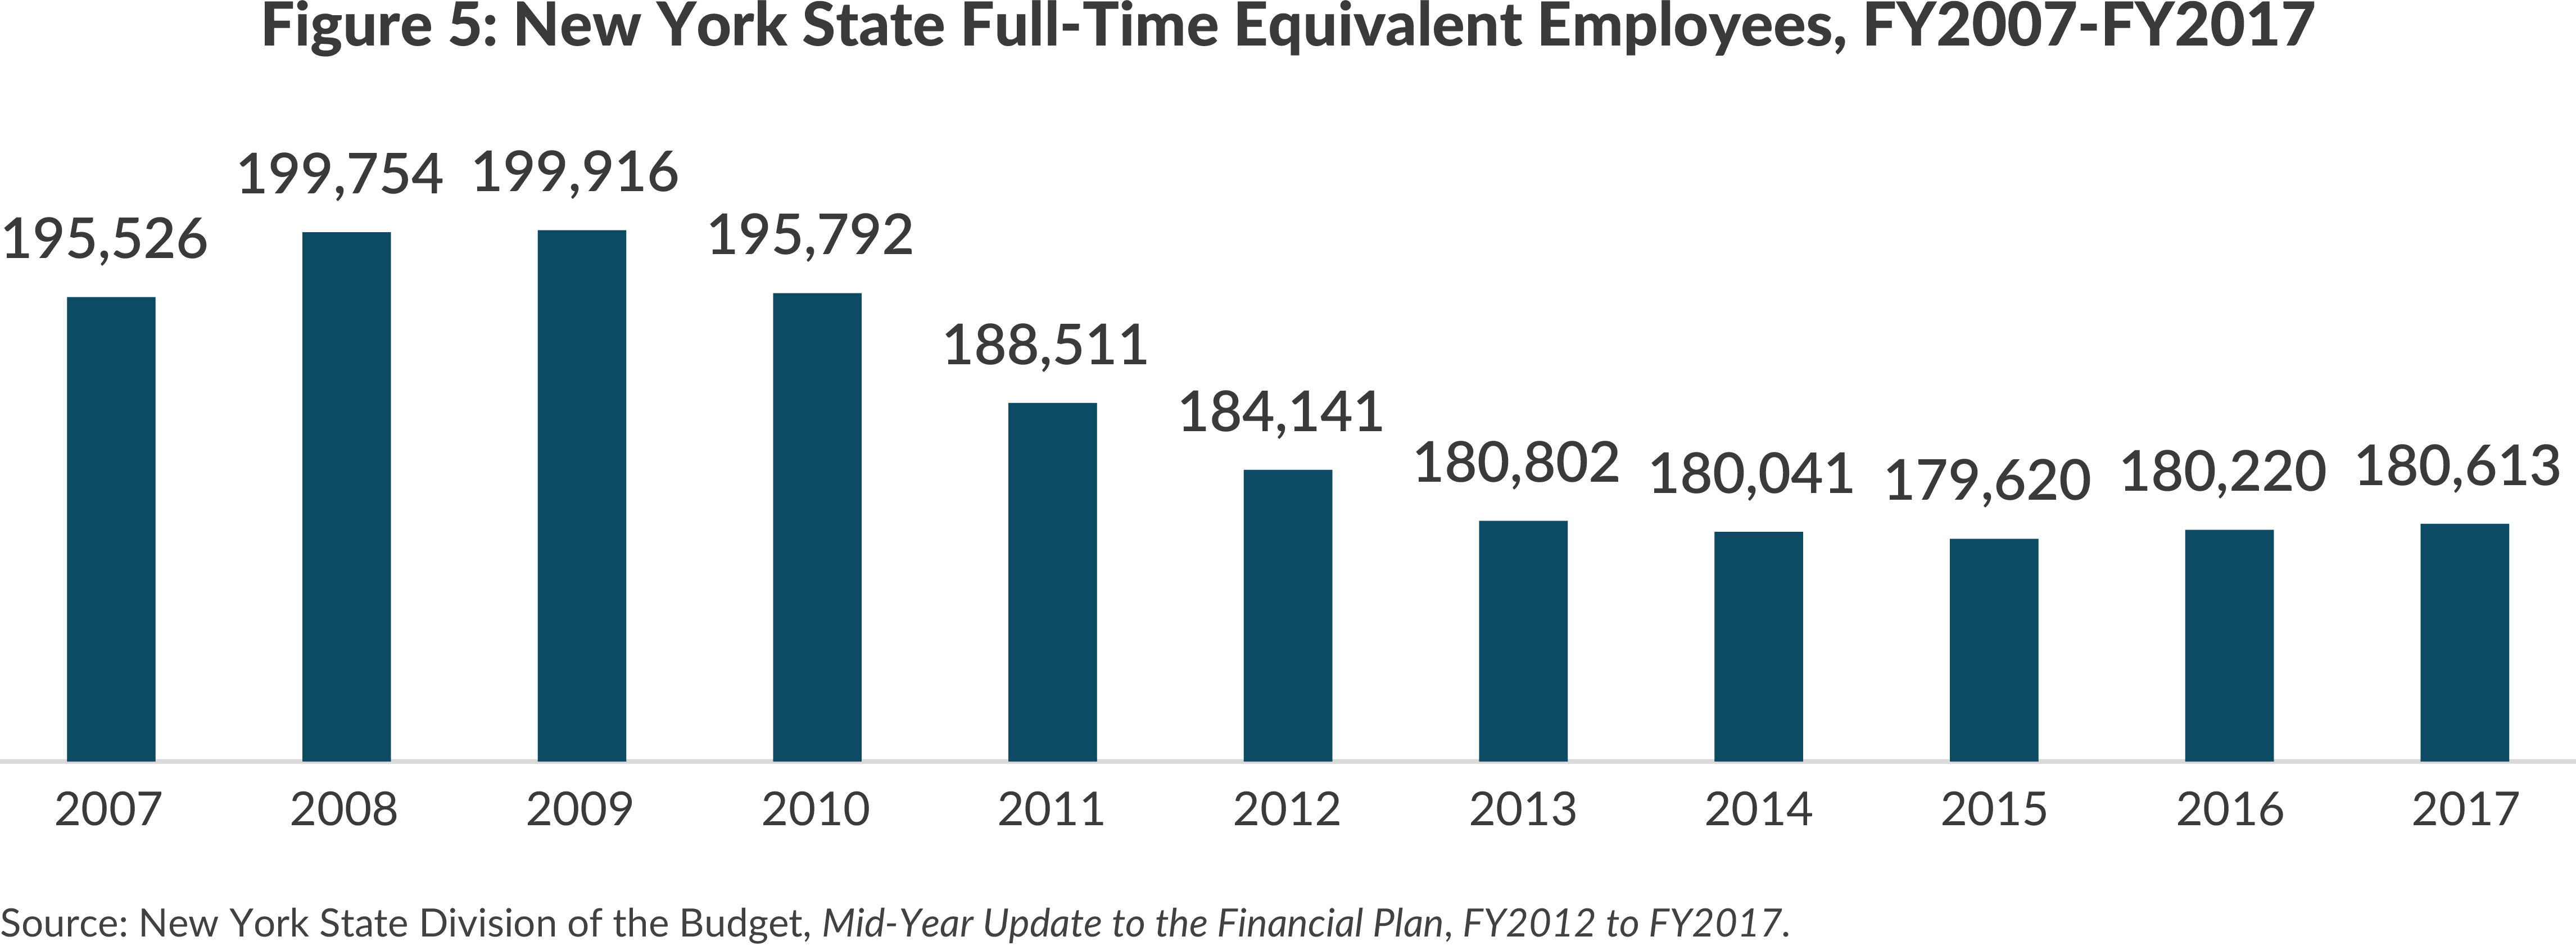 Figure 5: New York State Full-Time Equivalent Employees, FY2007-FY2017